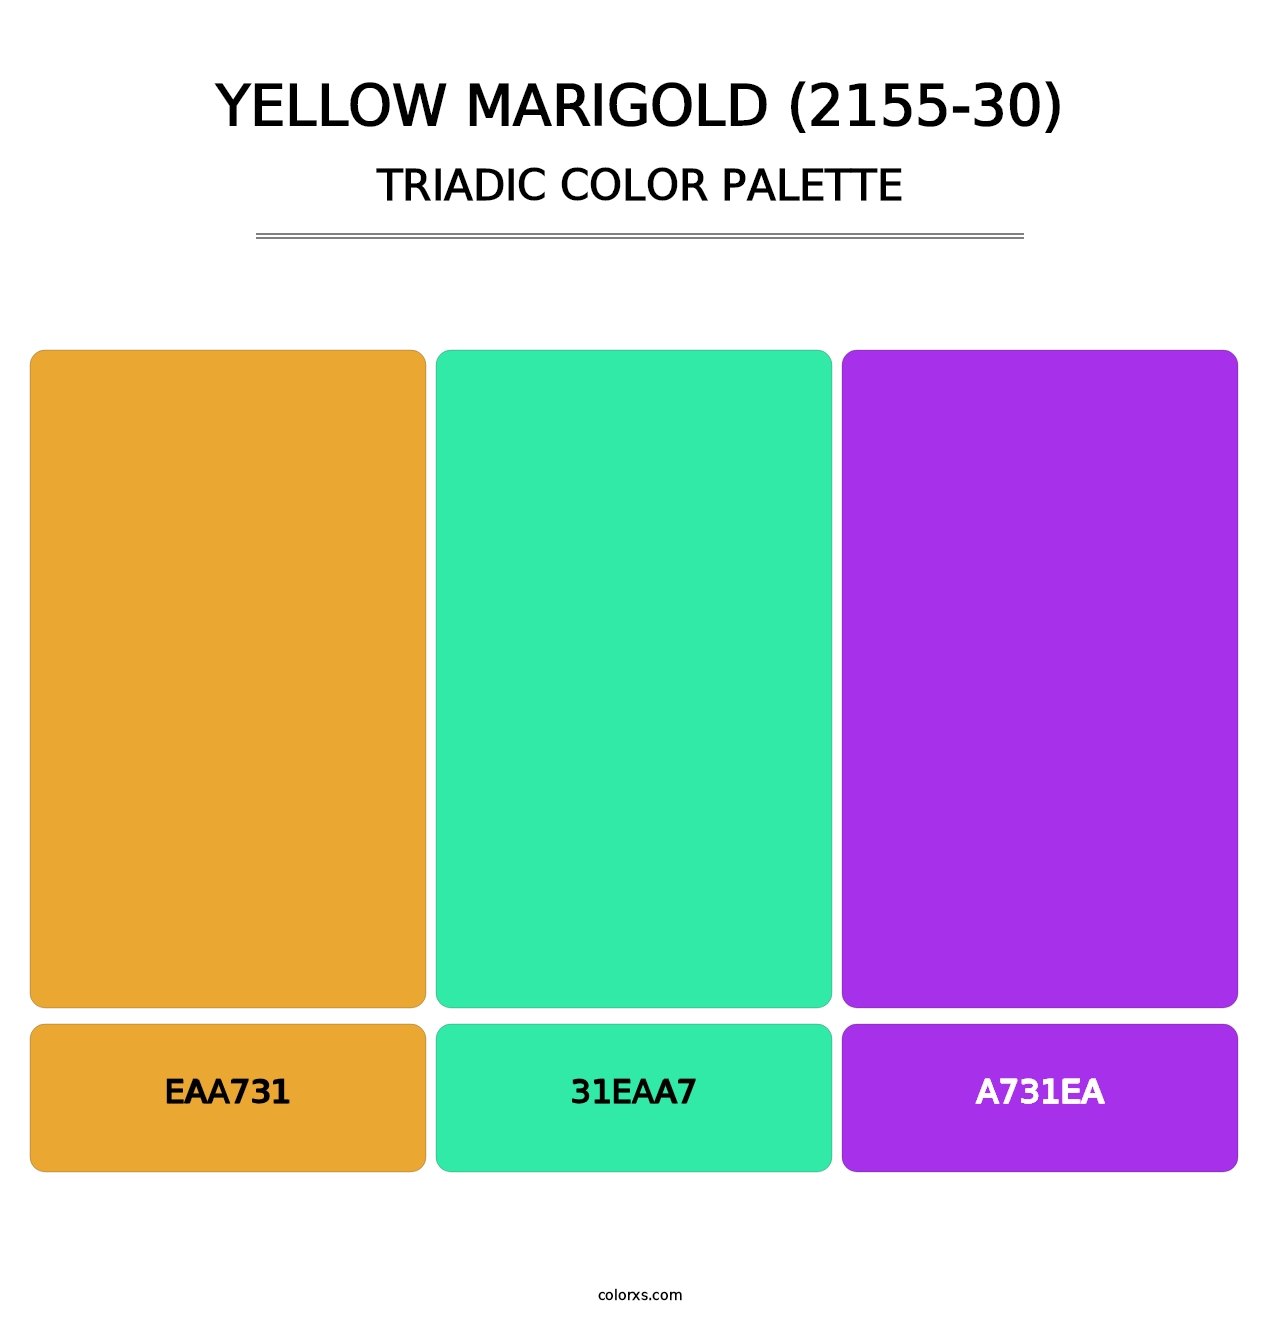 Yellow Marigold (2155-30) - Triadic Color Palette